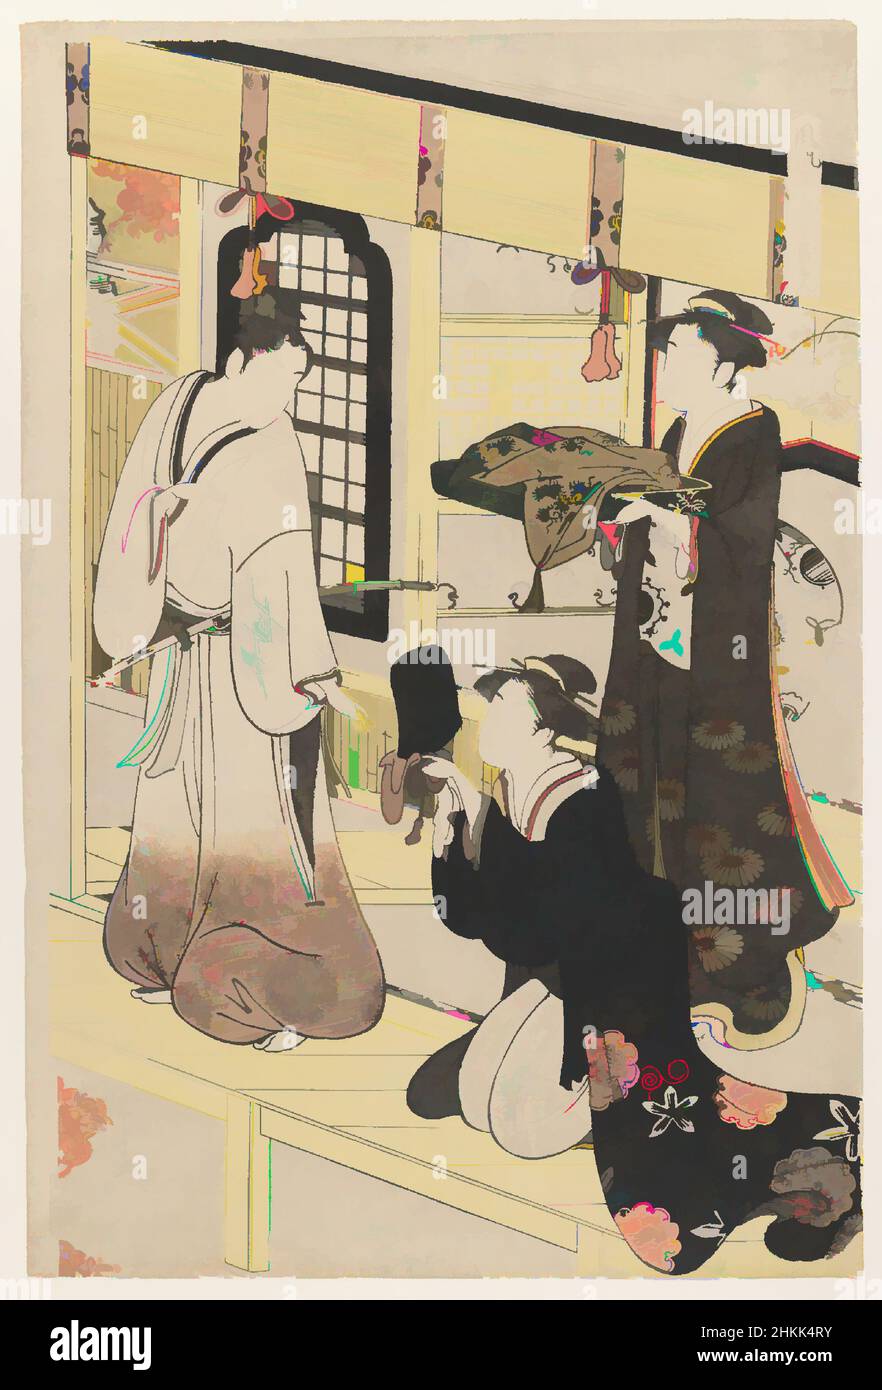 Art inspired by Hana no En,' from 'Eight Views of Disguised Genji, Furyu Yatsushi Genji', Eishi Chobunsai, Japanese, 1756-1829, Color woodblock print on paper, Japan, ca. 1790, Edo Period, Sheet: 15 3/8 x 10 13/16 in., 39.0 x 25.9 cm, Classic works modernized by Artotop with a splash of modernity. Shapes, color and value, eye-catching visual impact on art. Emotions through freedom of artworks in a contemporary way. A timeless message pursuing a wildly creative new direction. Artists turning to the digital medium and creating the Artotop NFT Stock Photo